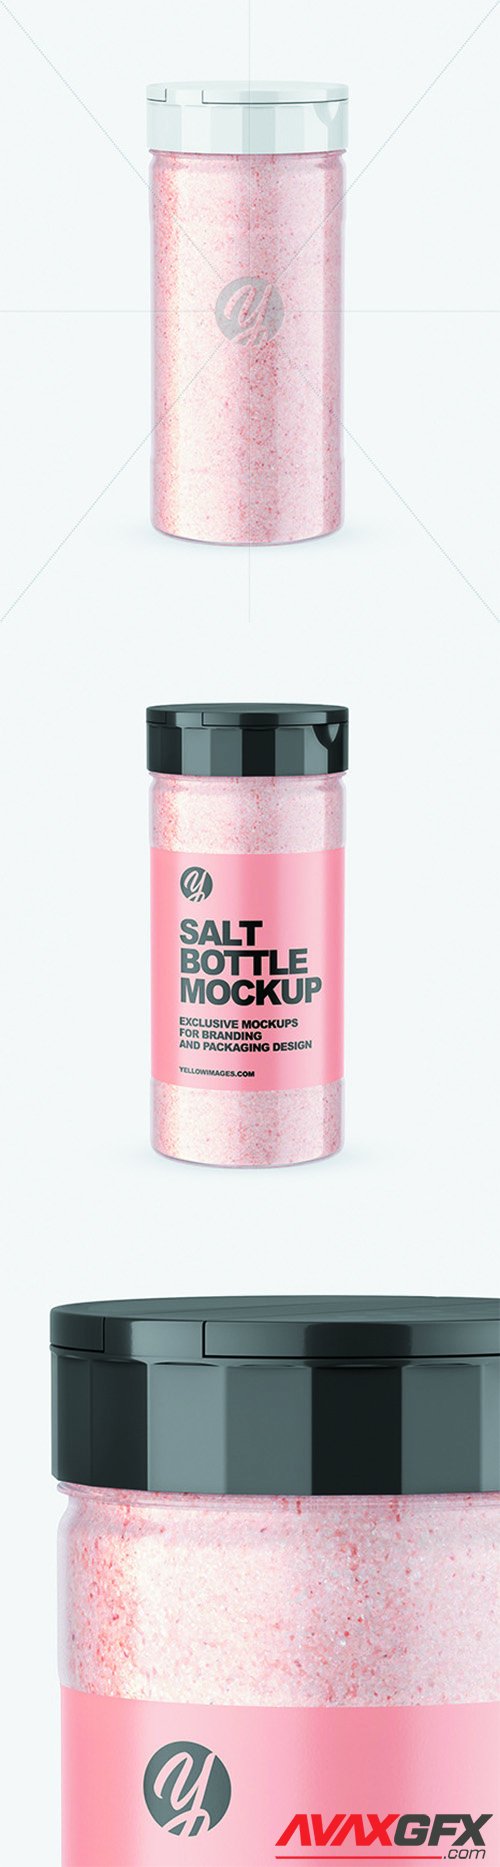 Download Glossy Clear Jar with Pink Salt Mockup 68701 » AVAXGFX ...